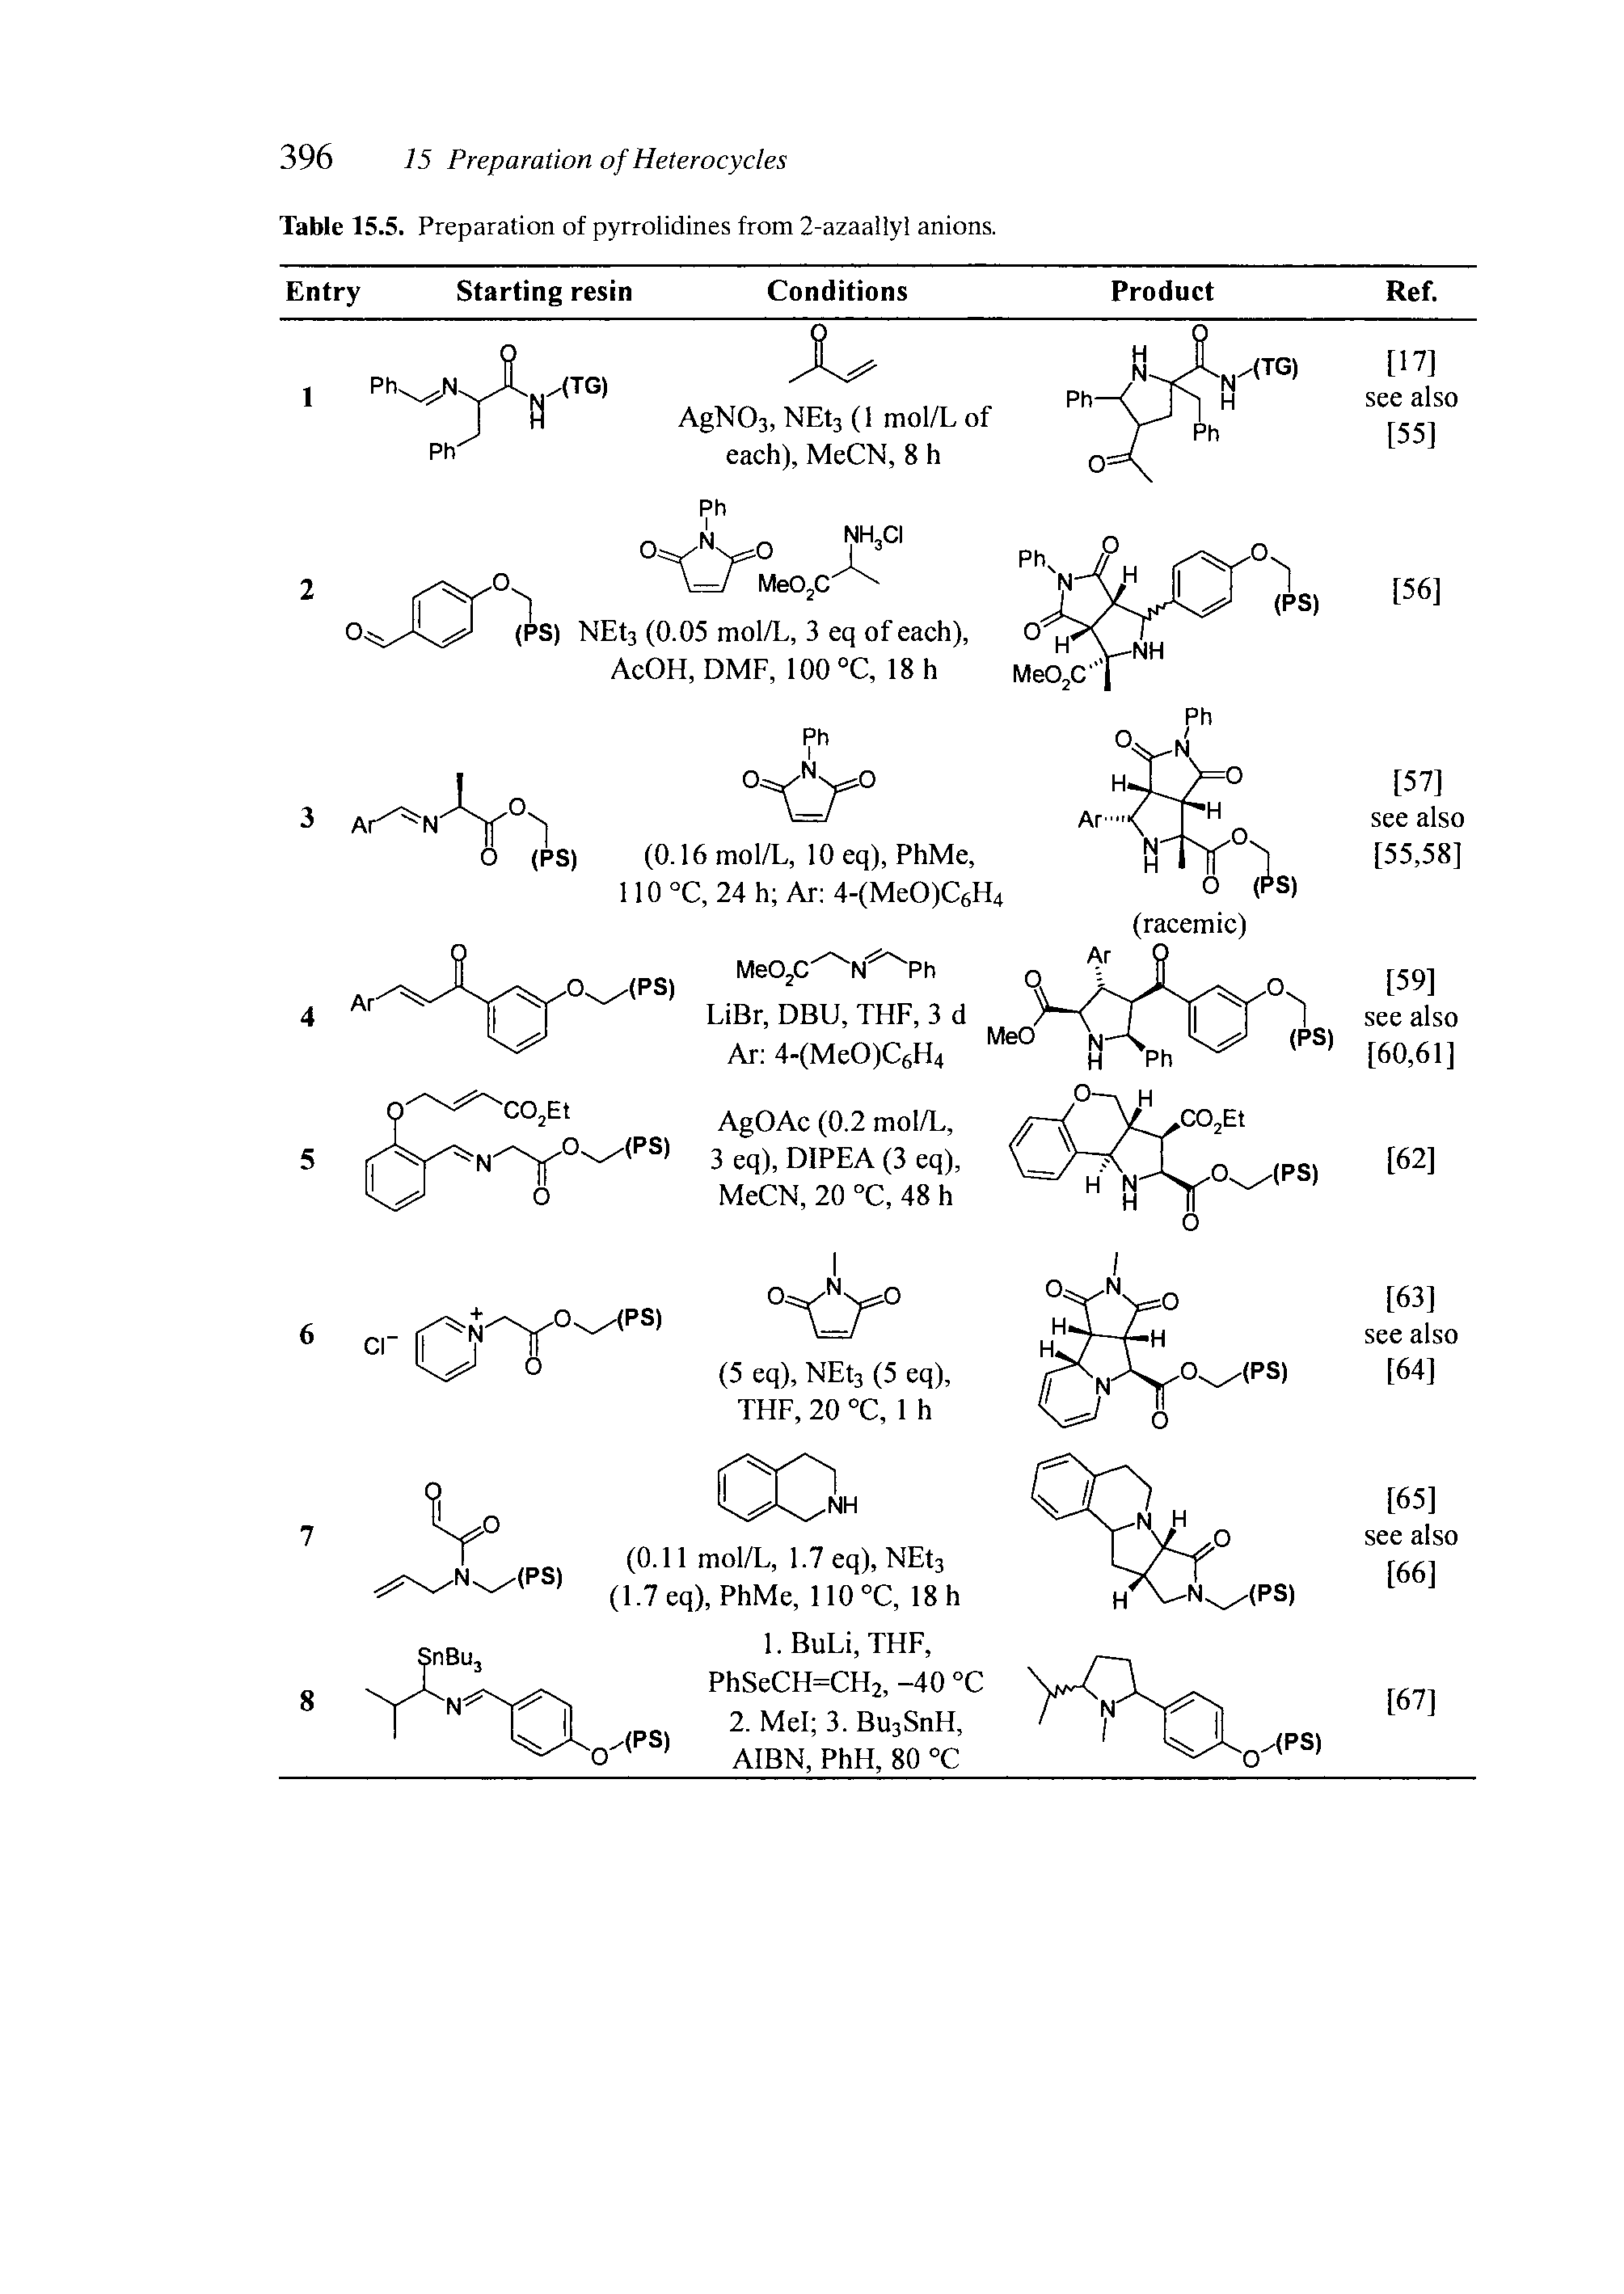 Table 15.5. Preparation of pyrrolidines from 2-azaallyl anions.